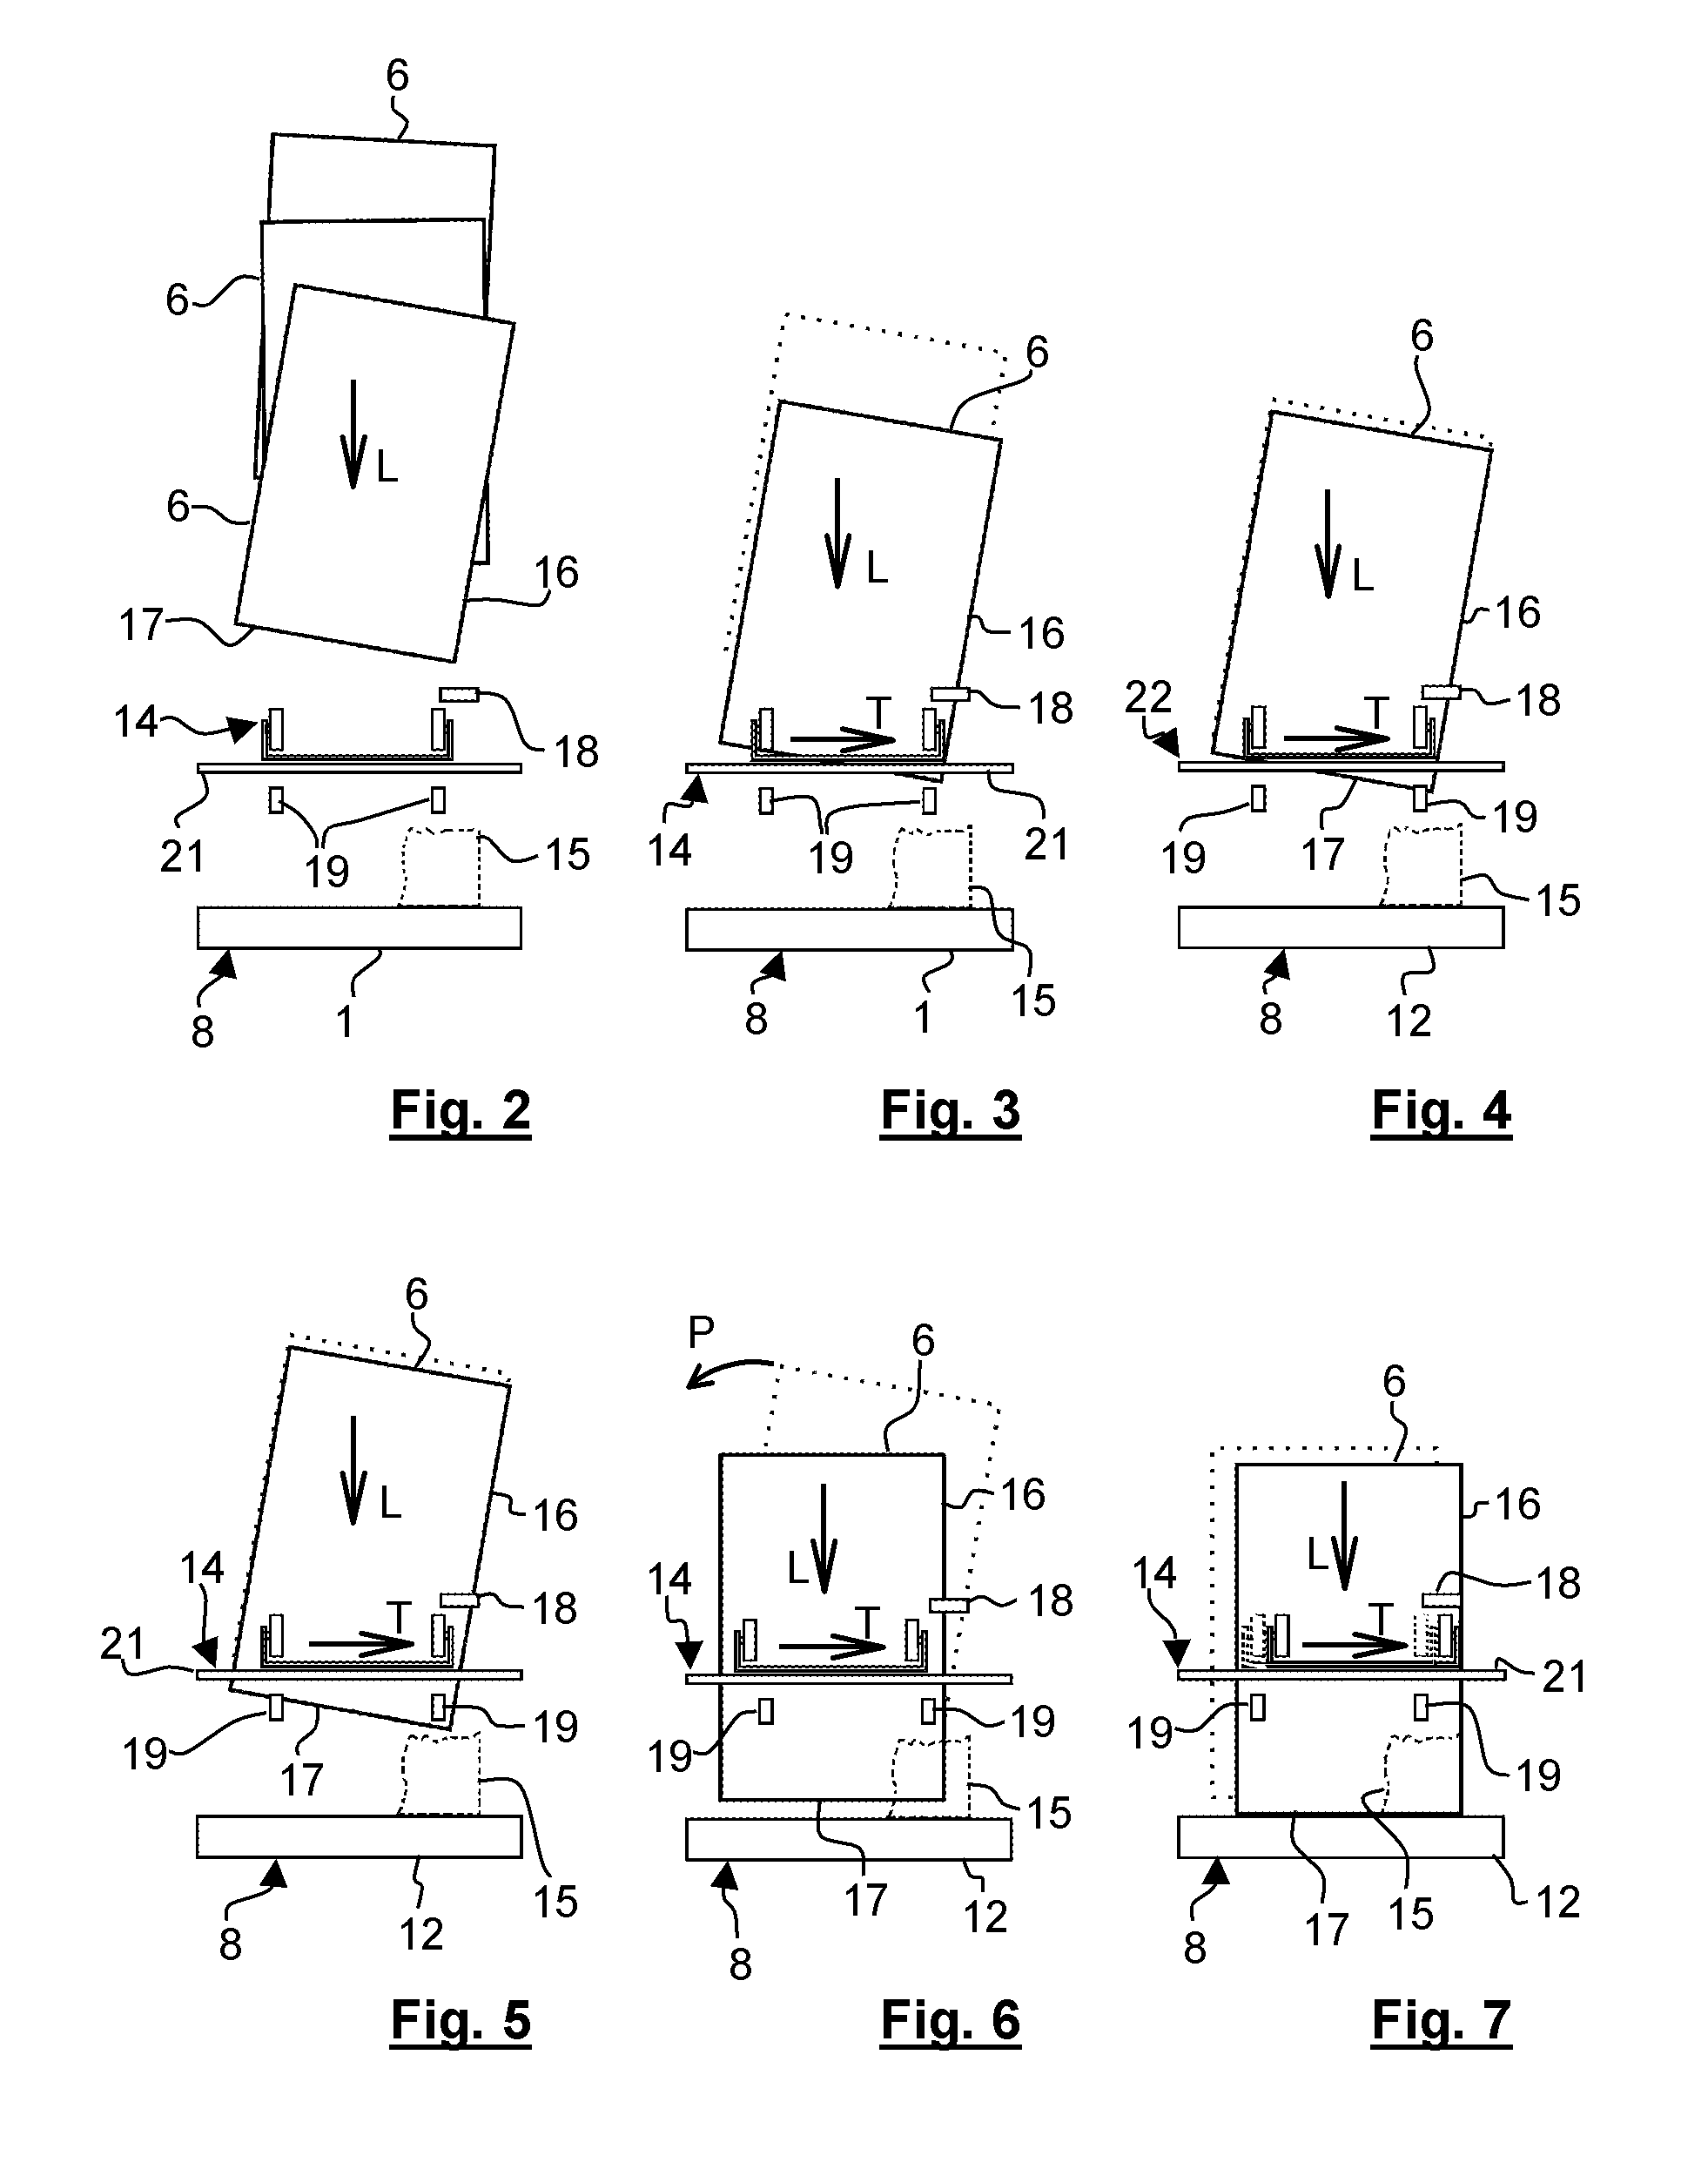 Method for manufacturing a multi-layer composite, arrangement for positioning a sheet-like element onto a backing in a laminating unit